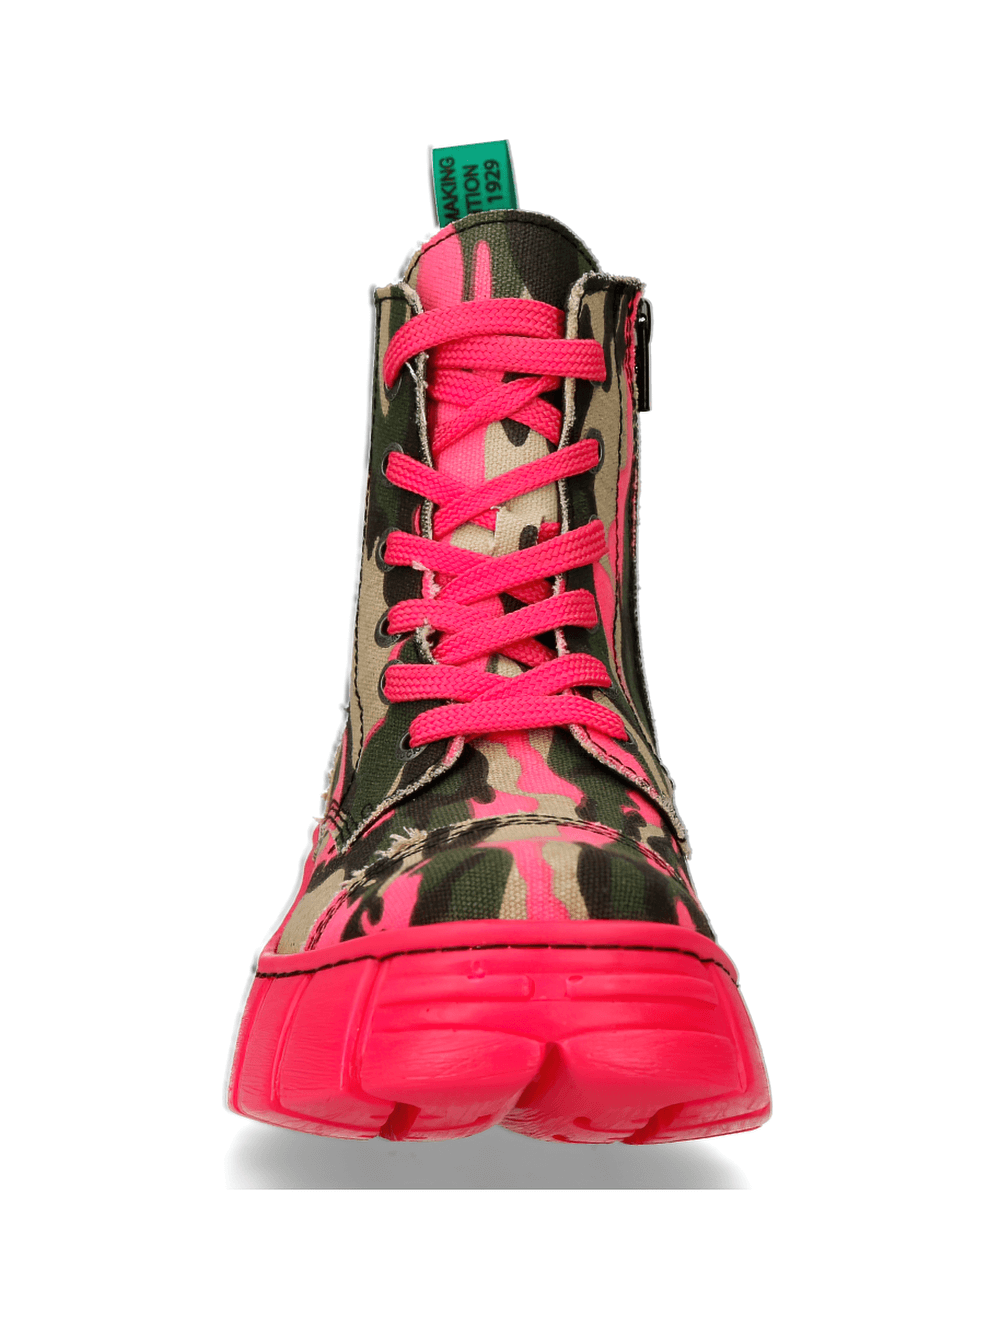 NEW ROCK Camo Ankle Boots with Pink Sole and Laces